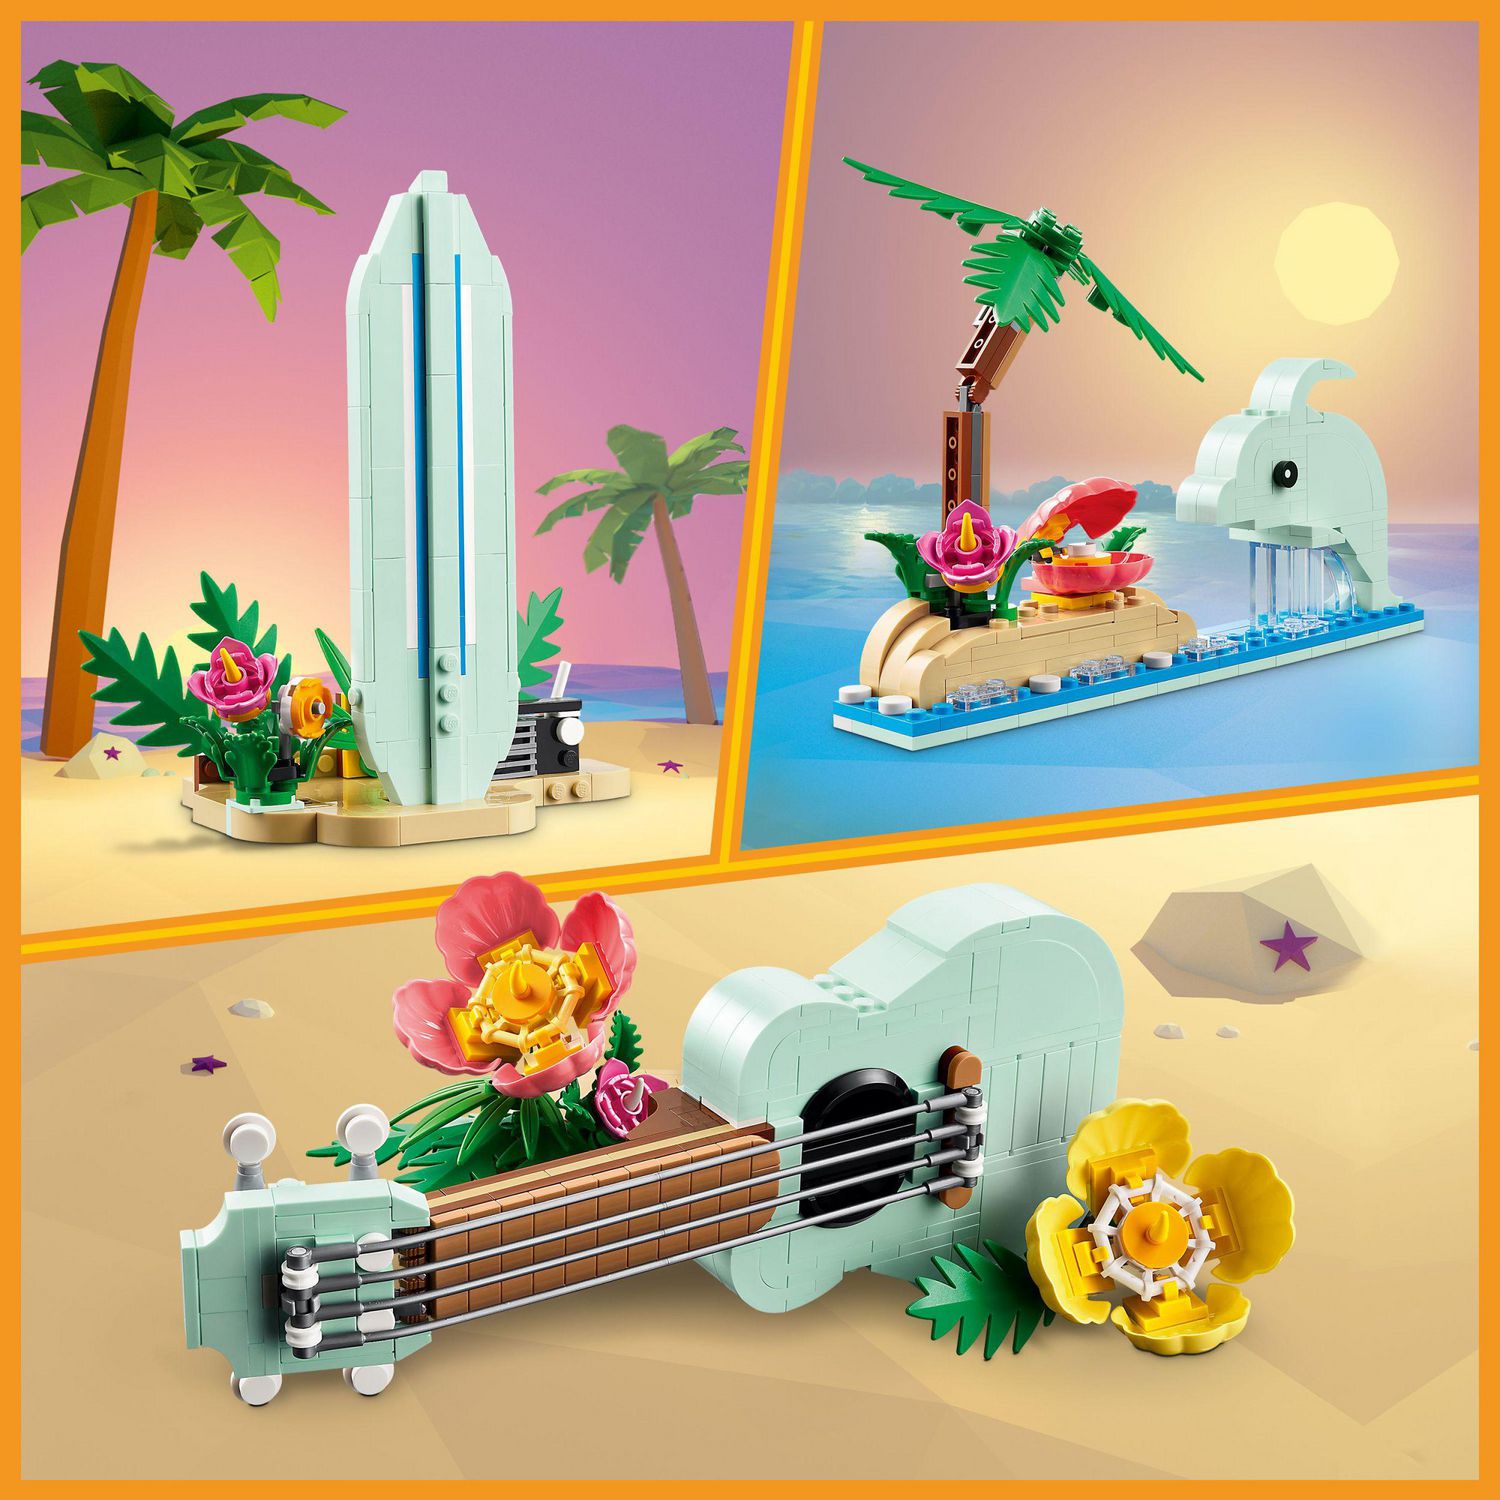 LEGO Creator 3 in 1 Tropical Ukulele Instrument Toy, Transforms from  Ukulele to Surfboard Toy to Dolphin Toy, Sea Animal Toy, Beach-Themed  Birthday